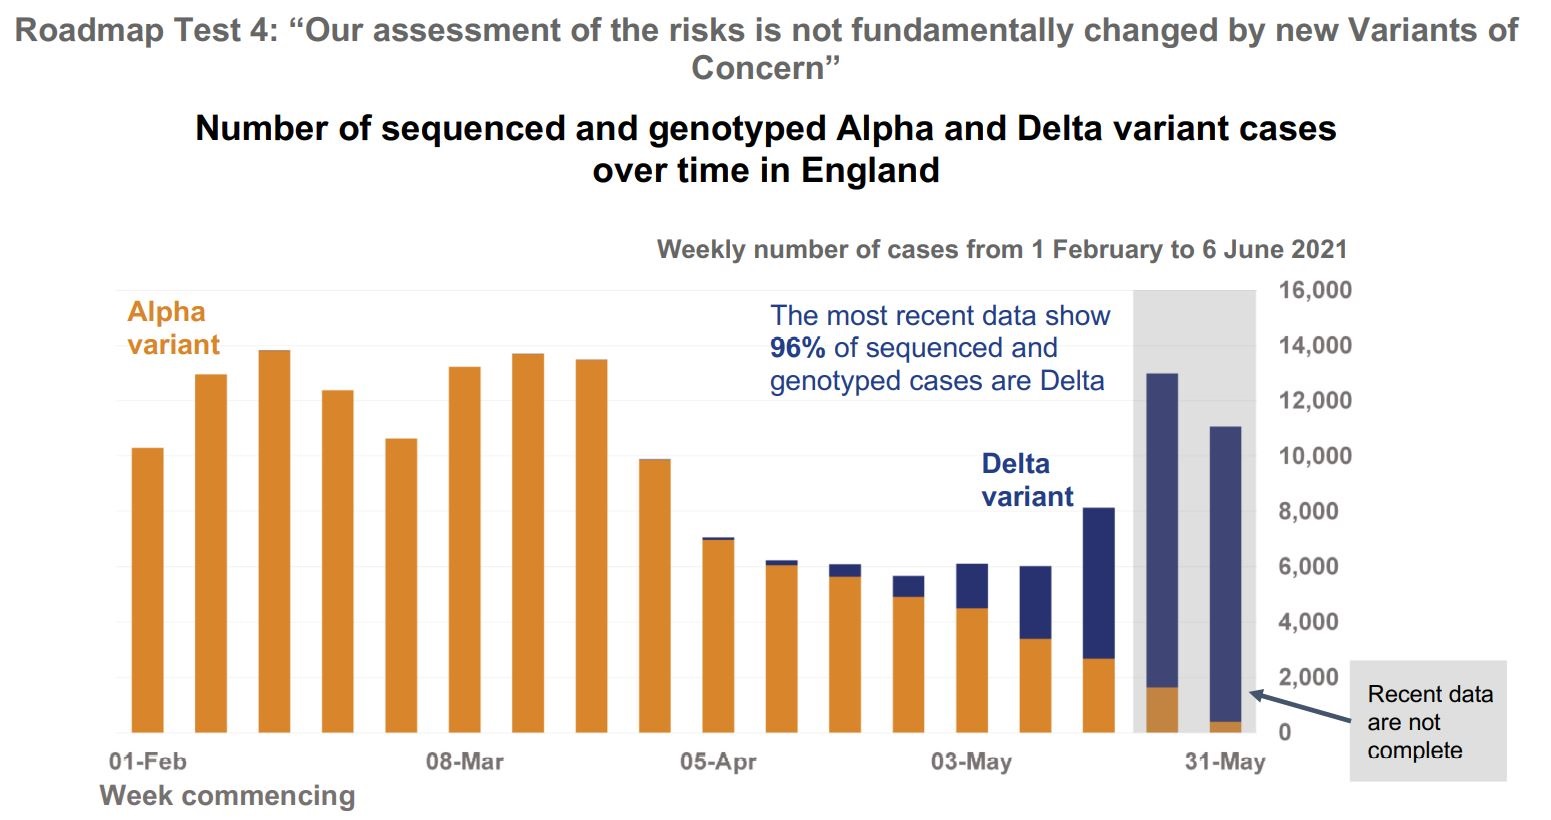 Press conference 14-6-2021 Slide 8 Roadmap Test 4 Number of sequenced and genotyped Alpha and Delta variant cases over time in England - enlarge